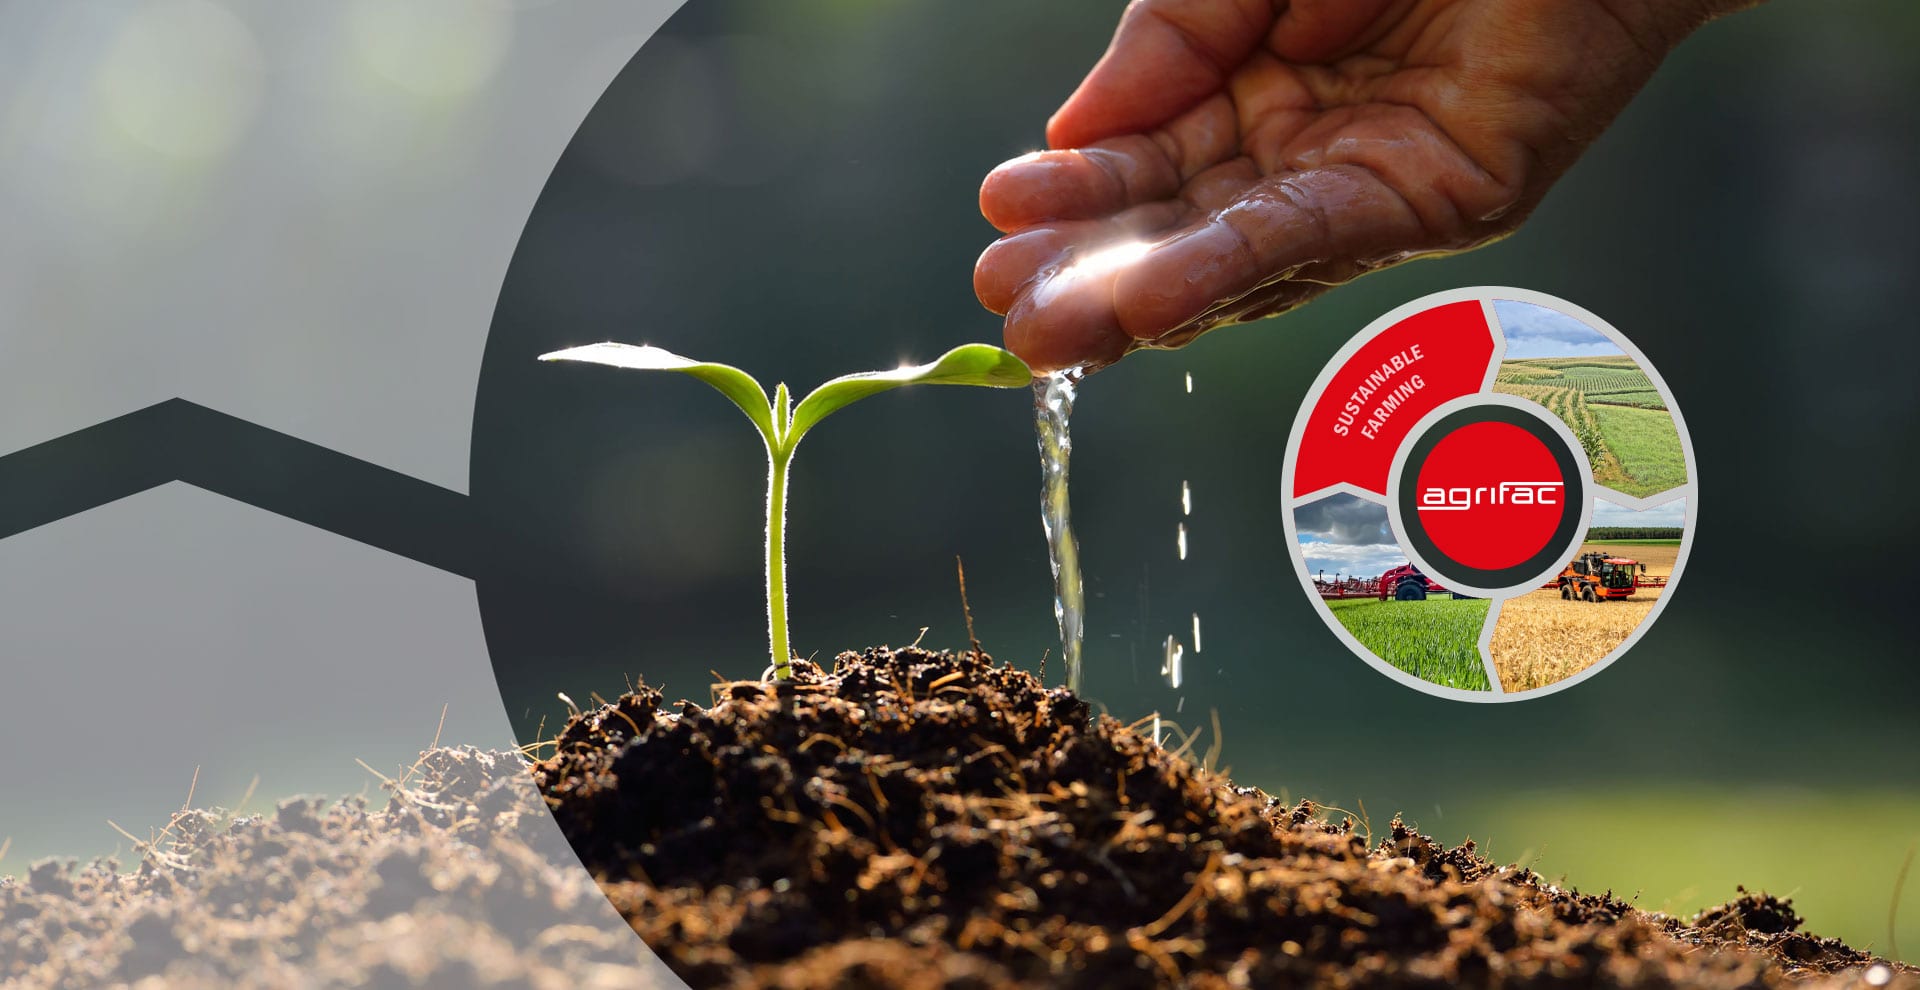 Sustainable Farming by Agrifac